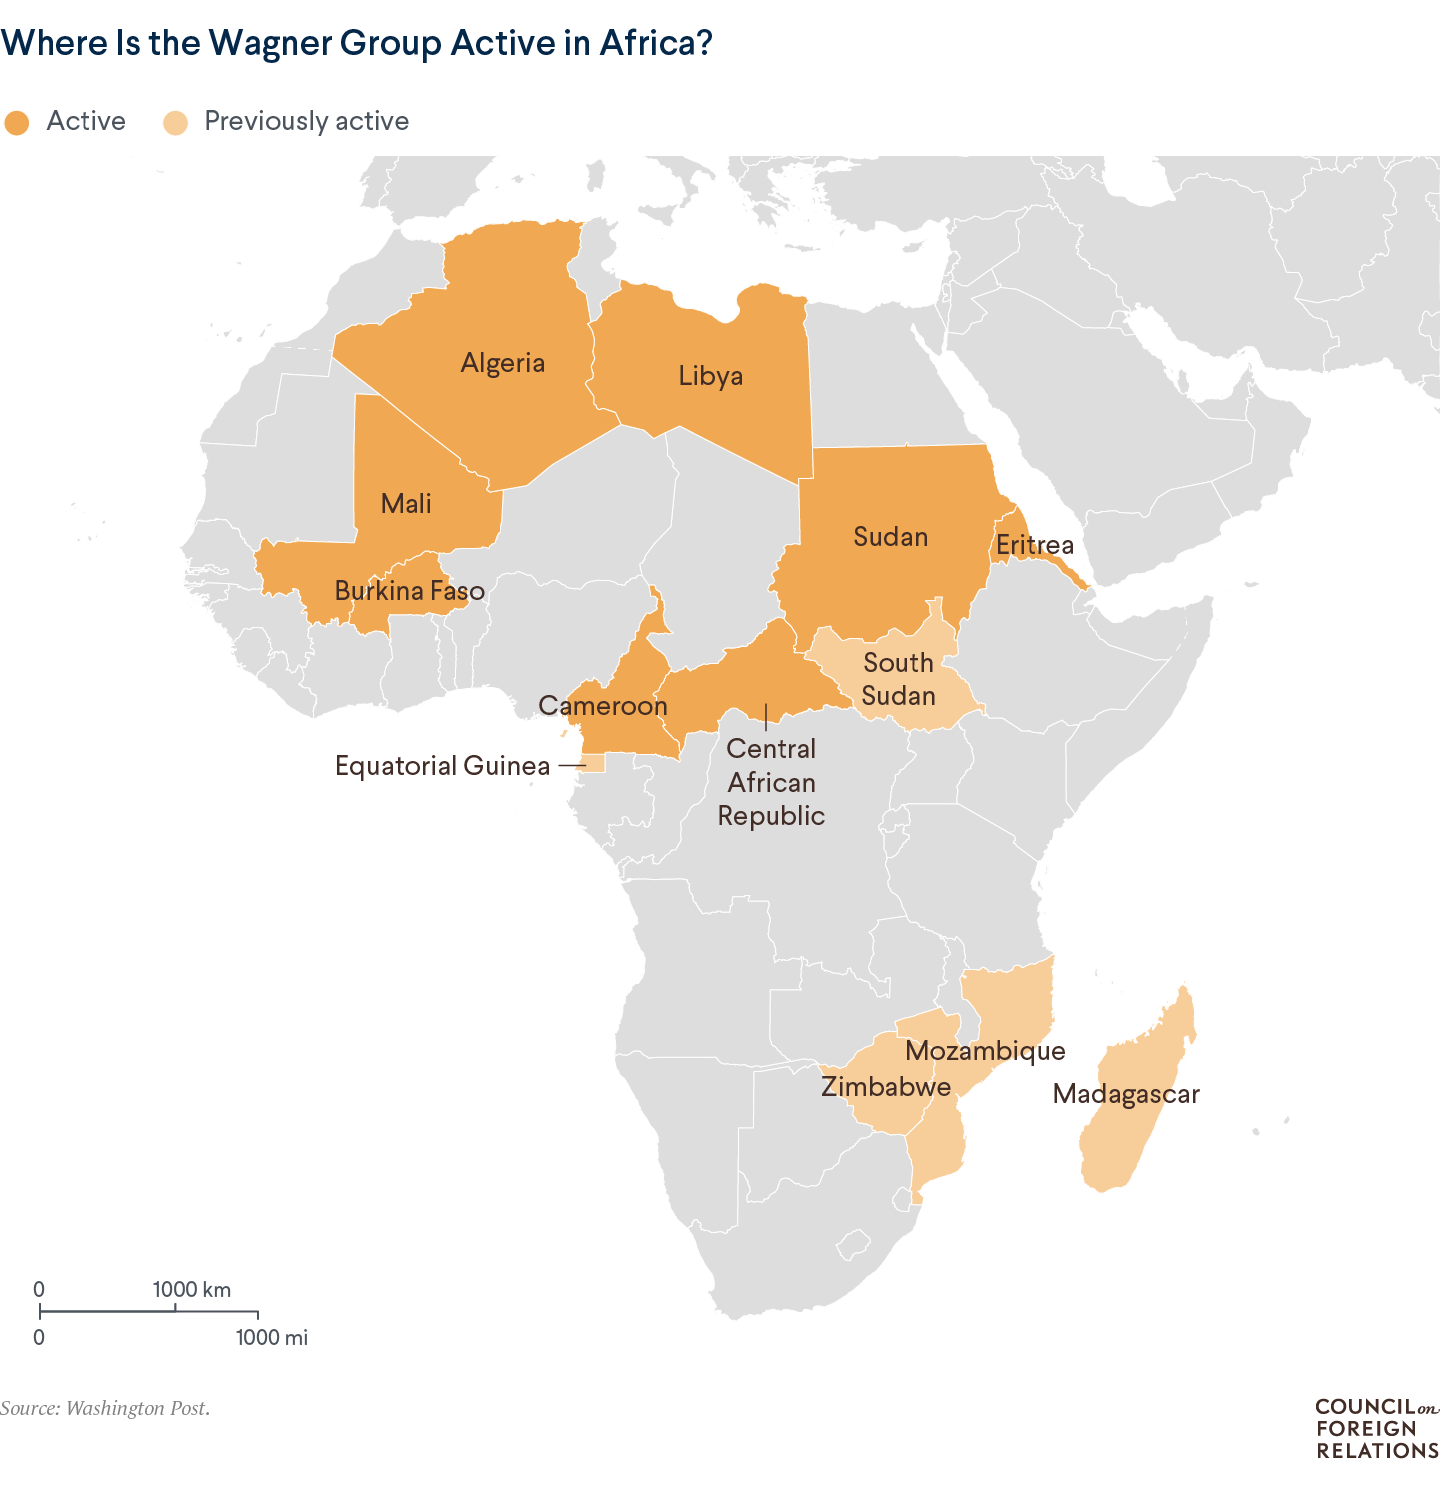 A map Africa showing which countries the Wagner Group
        is active in (Algeria, Burkina Faso, Cameroon, Central African
        Republic, Equatorial Guinea, Eritrea, Libya, Mali, and Sudan).